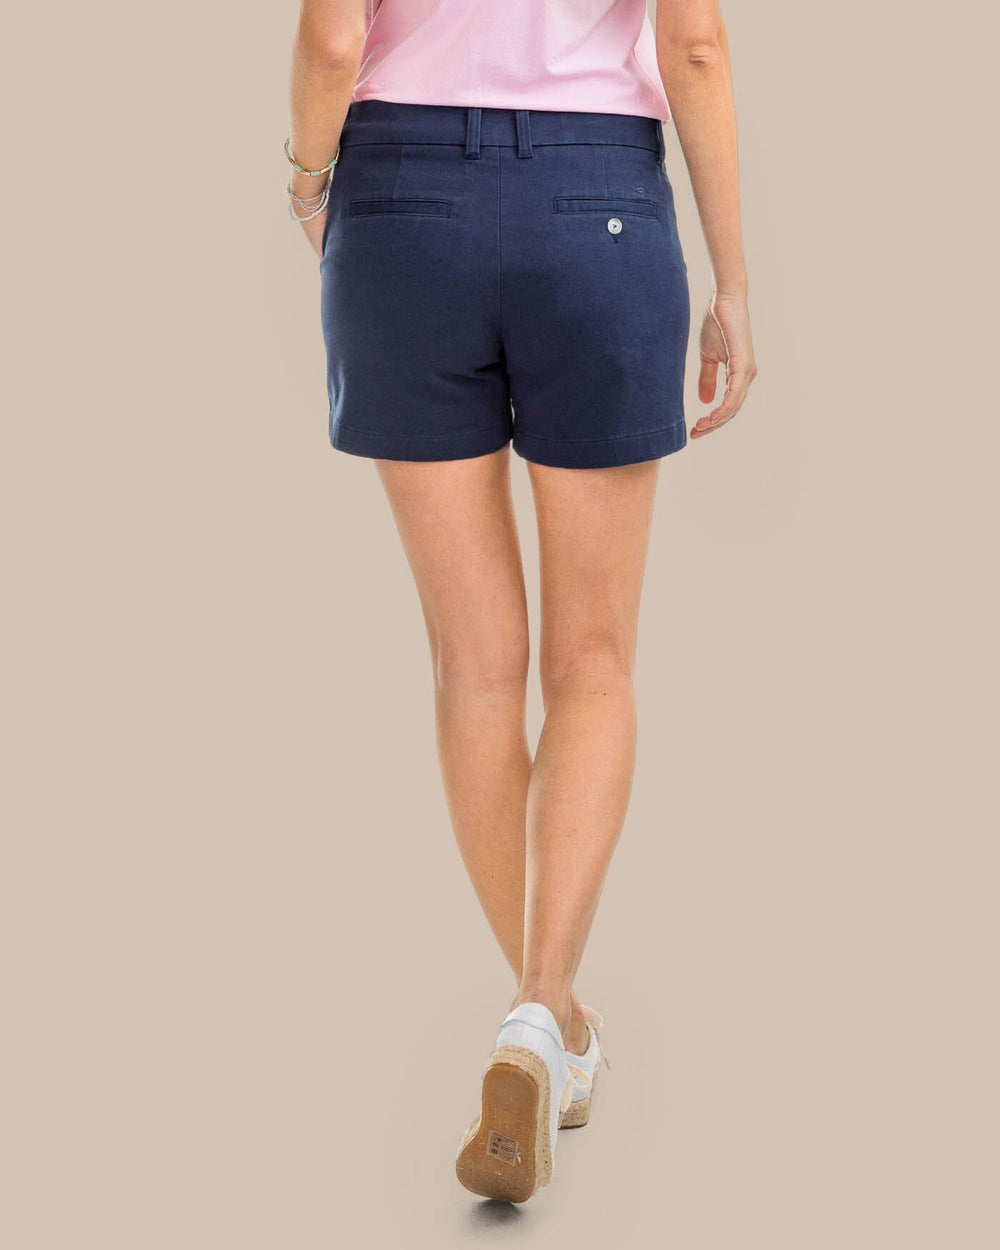 The back view of the Women's Navy 3" Leah Seersucker Short by Southern Tide - Nautical Navy